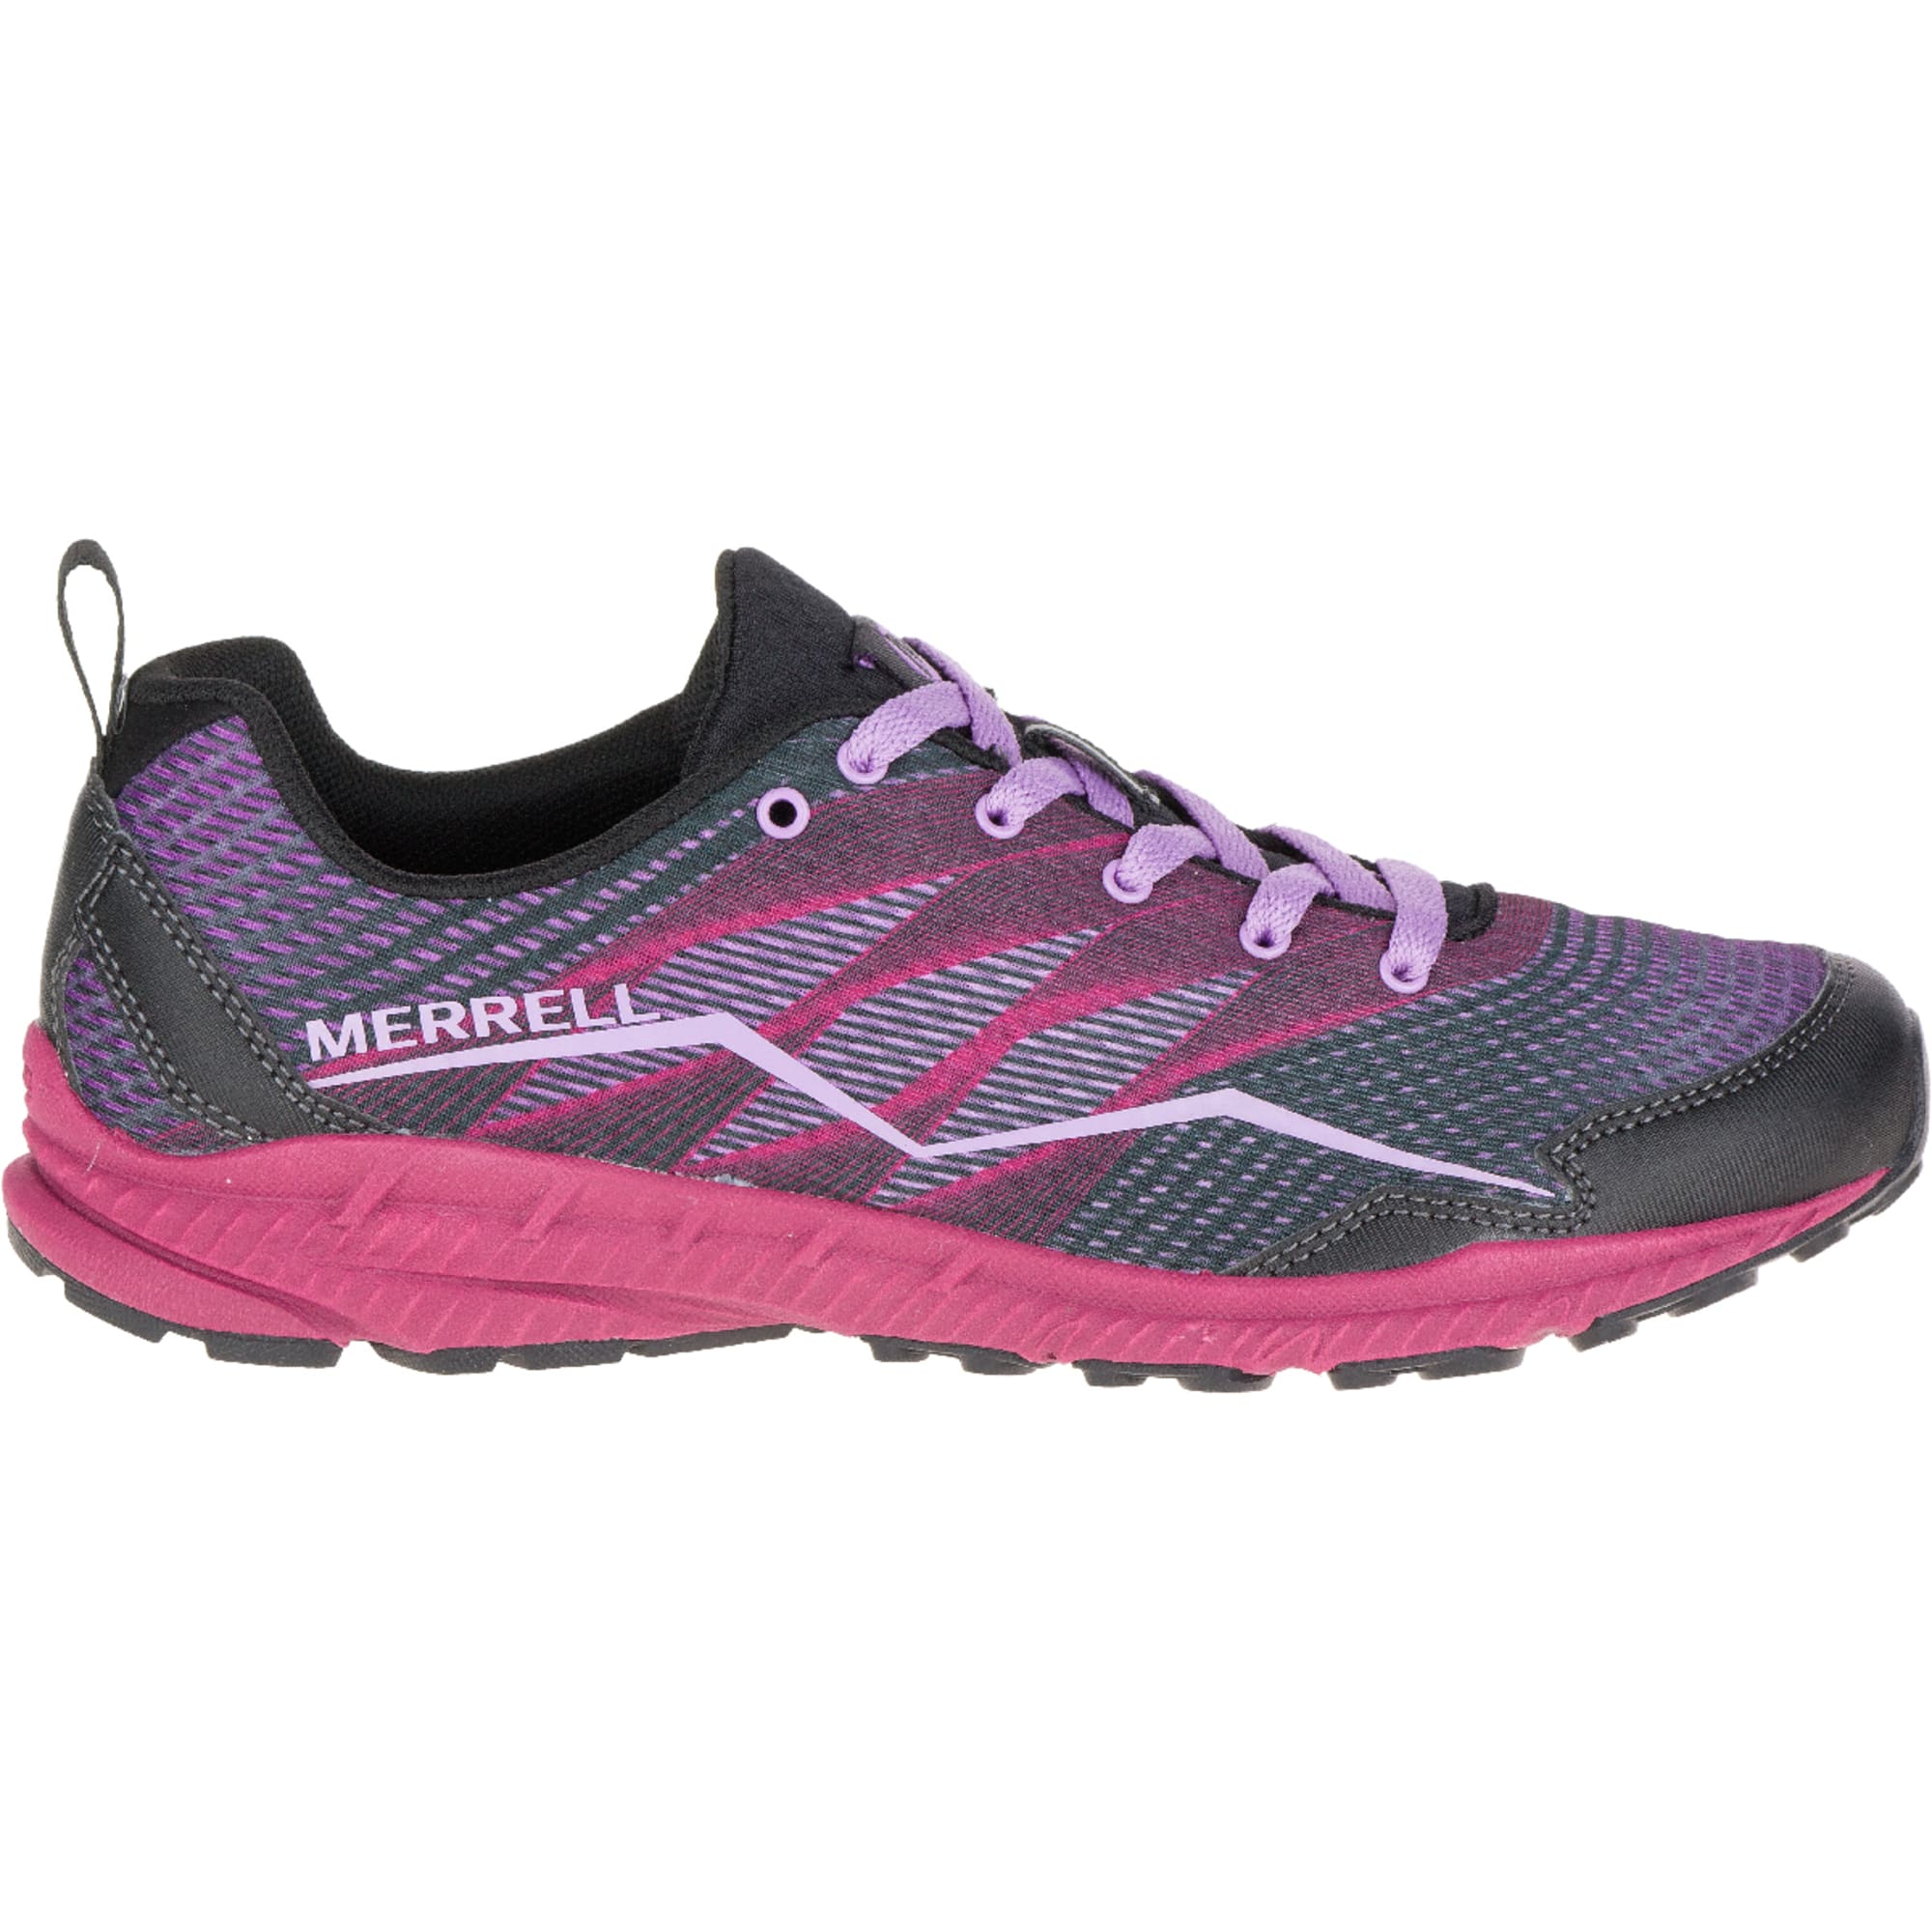 Trail Crusher Trail Running Shoes, Pink/Black - Eastern Mountain Sports